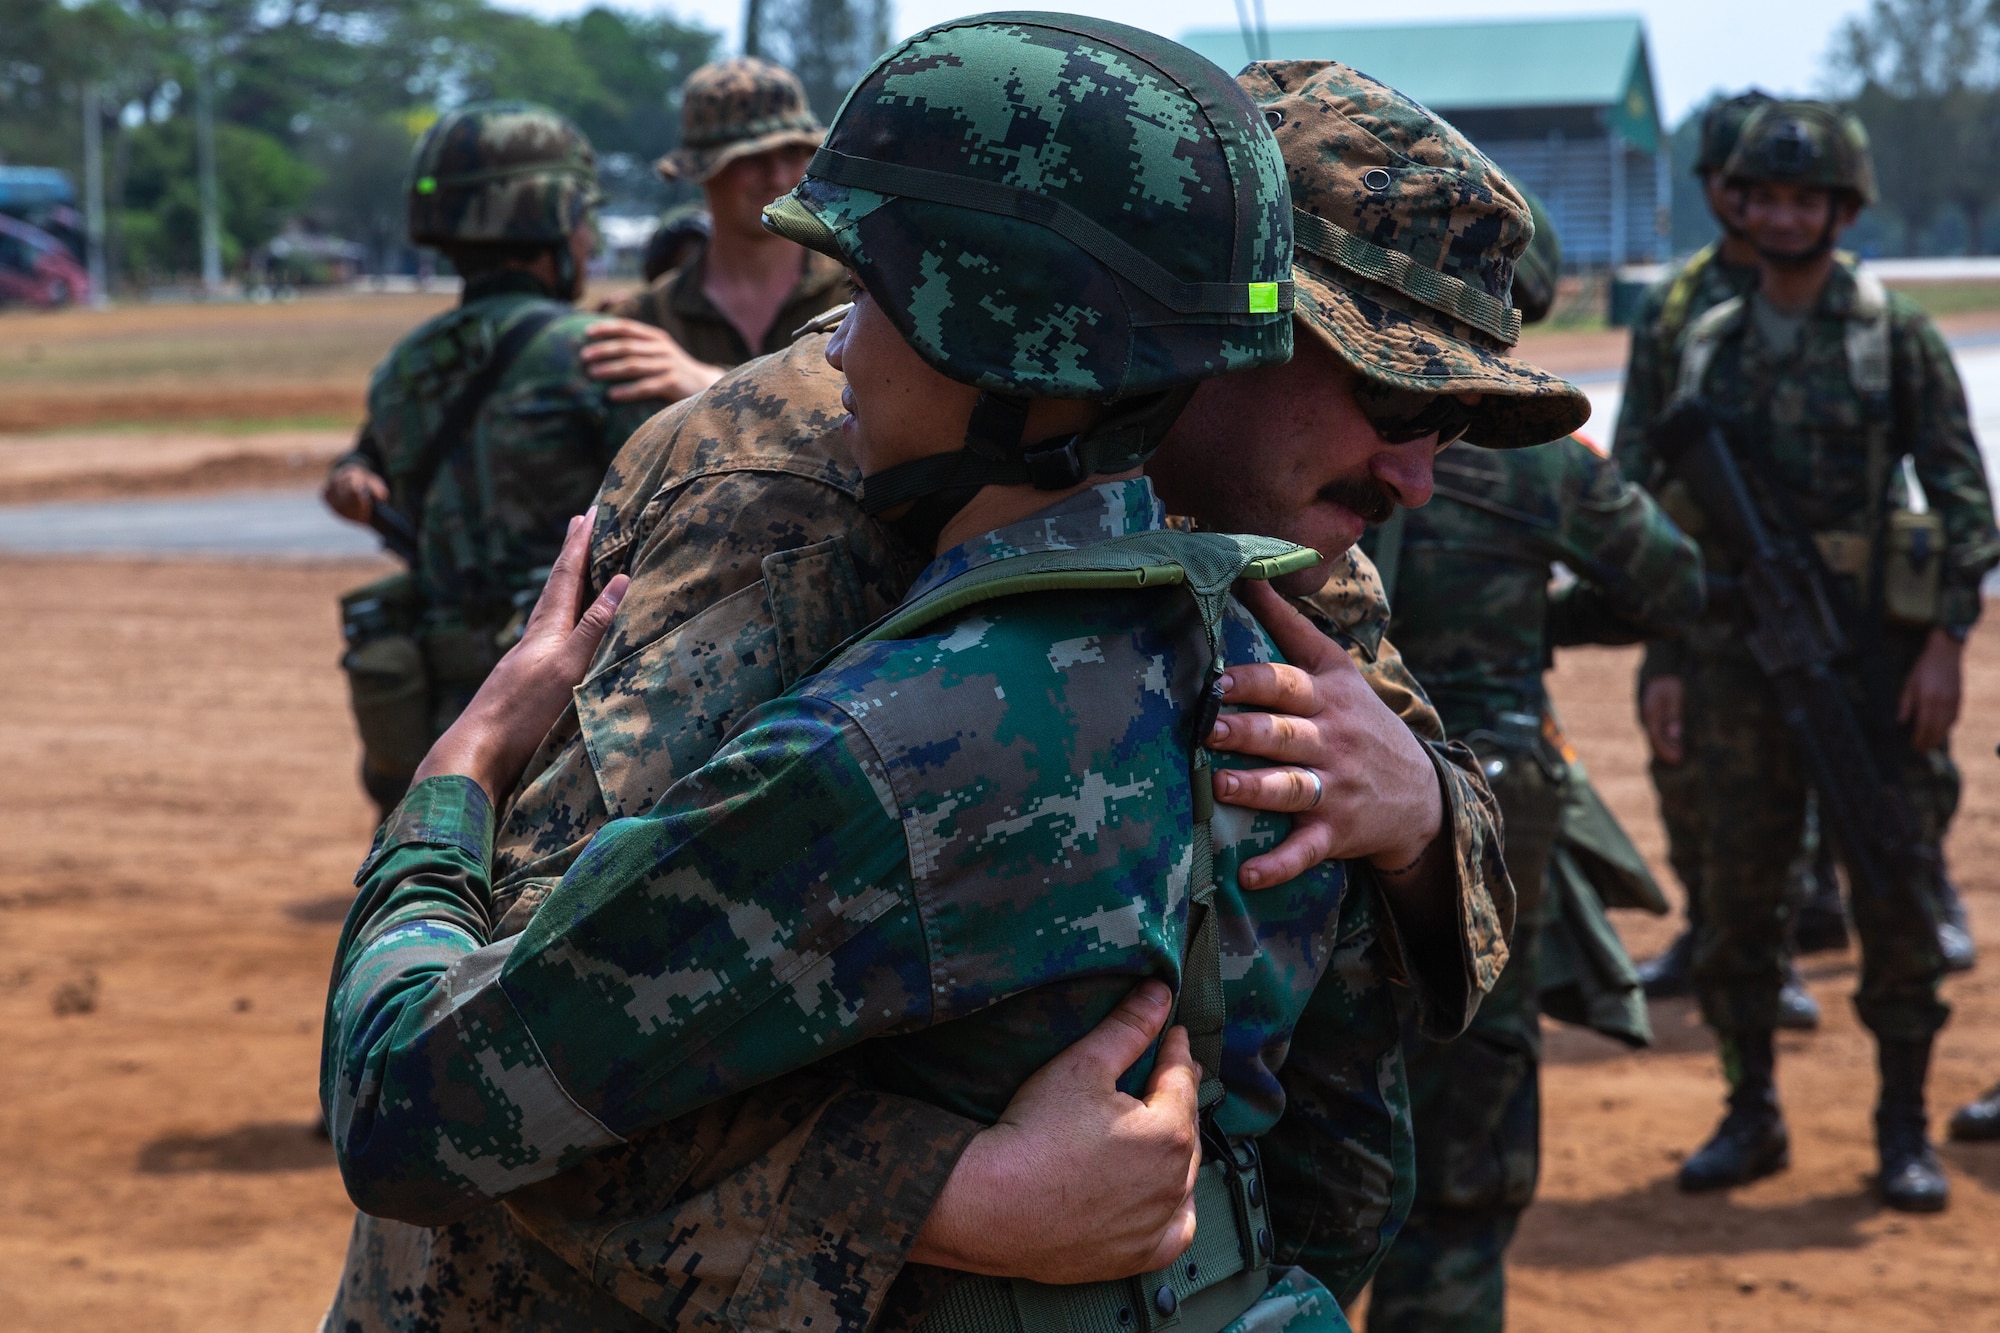 U.S. Marines with 1st Battalion, 7th Marines, and Royal Thai Marines with 2nd Battalion, 1st Infantry Regiment, exchange gifts and say goodbye after training together during Exercise Cobra Gold at Chanthaburi Province, Kingdom of Thailand, March 3, 2023